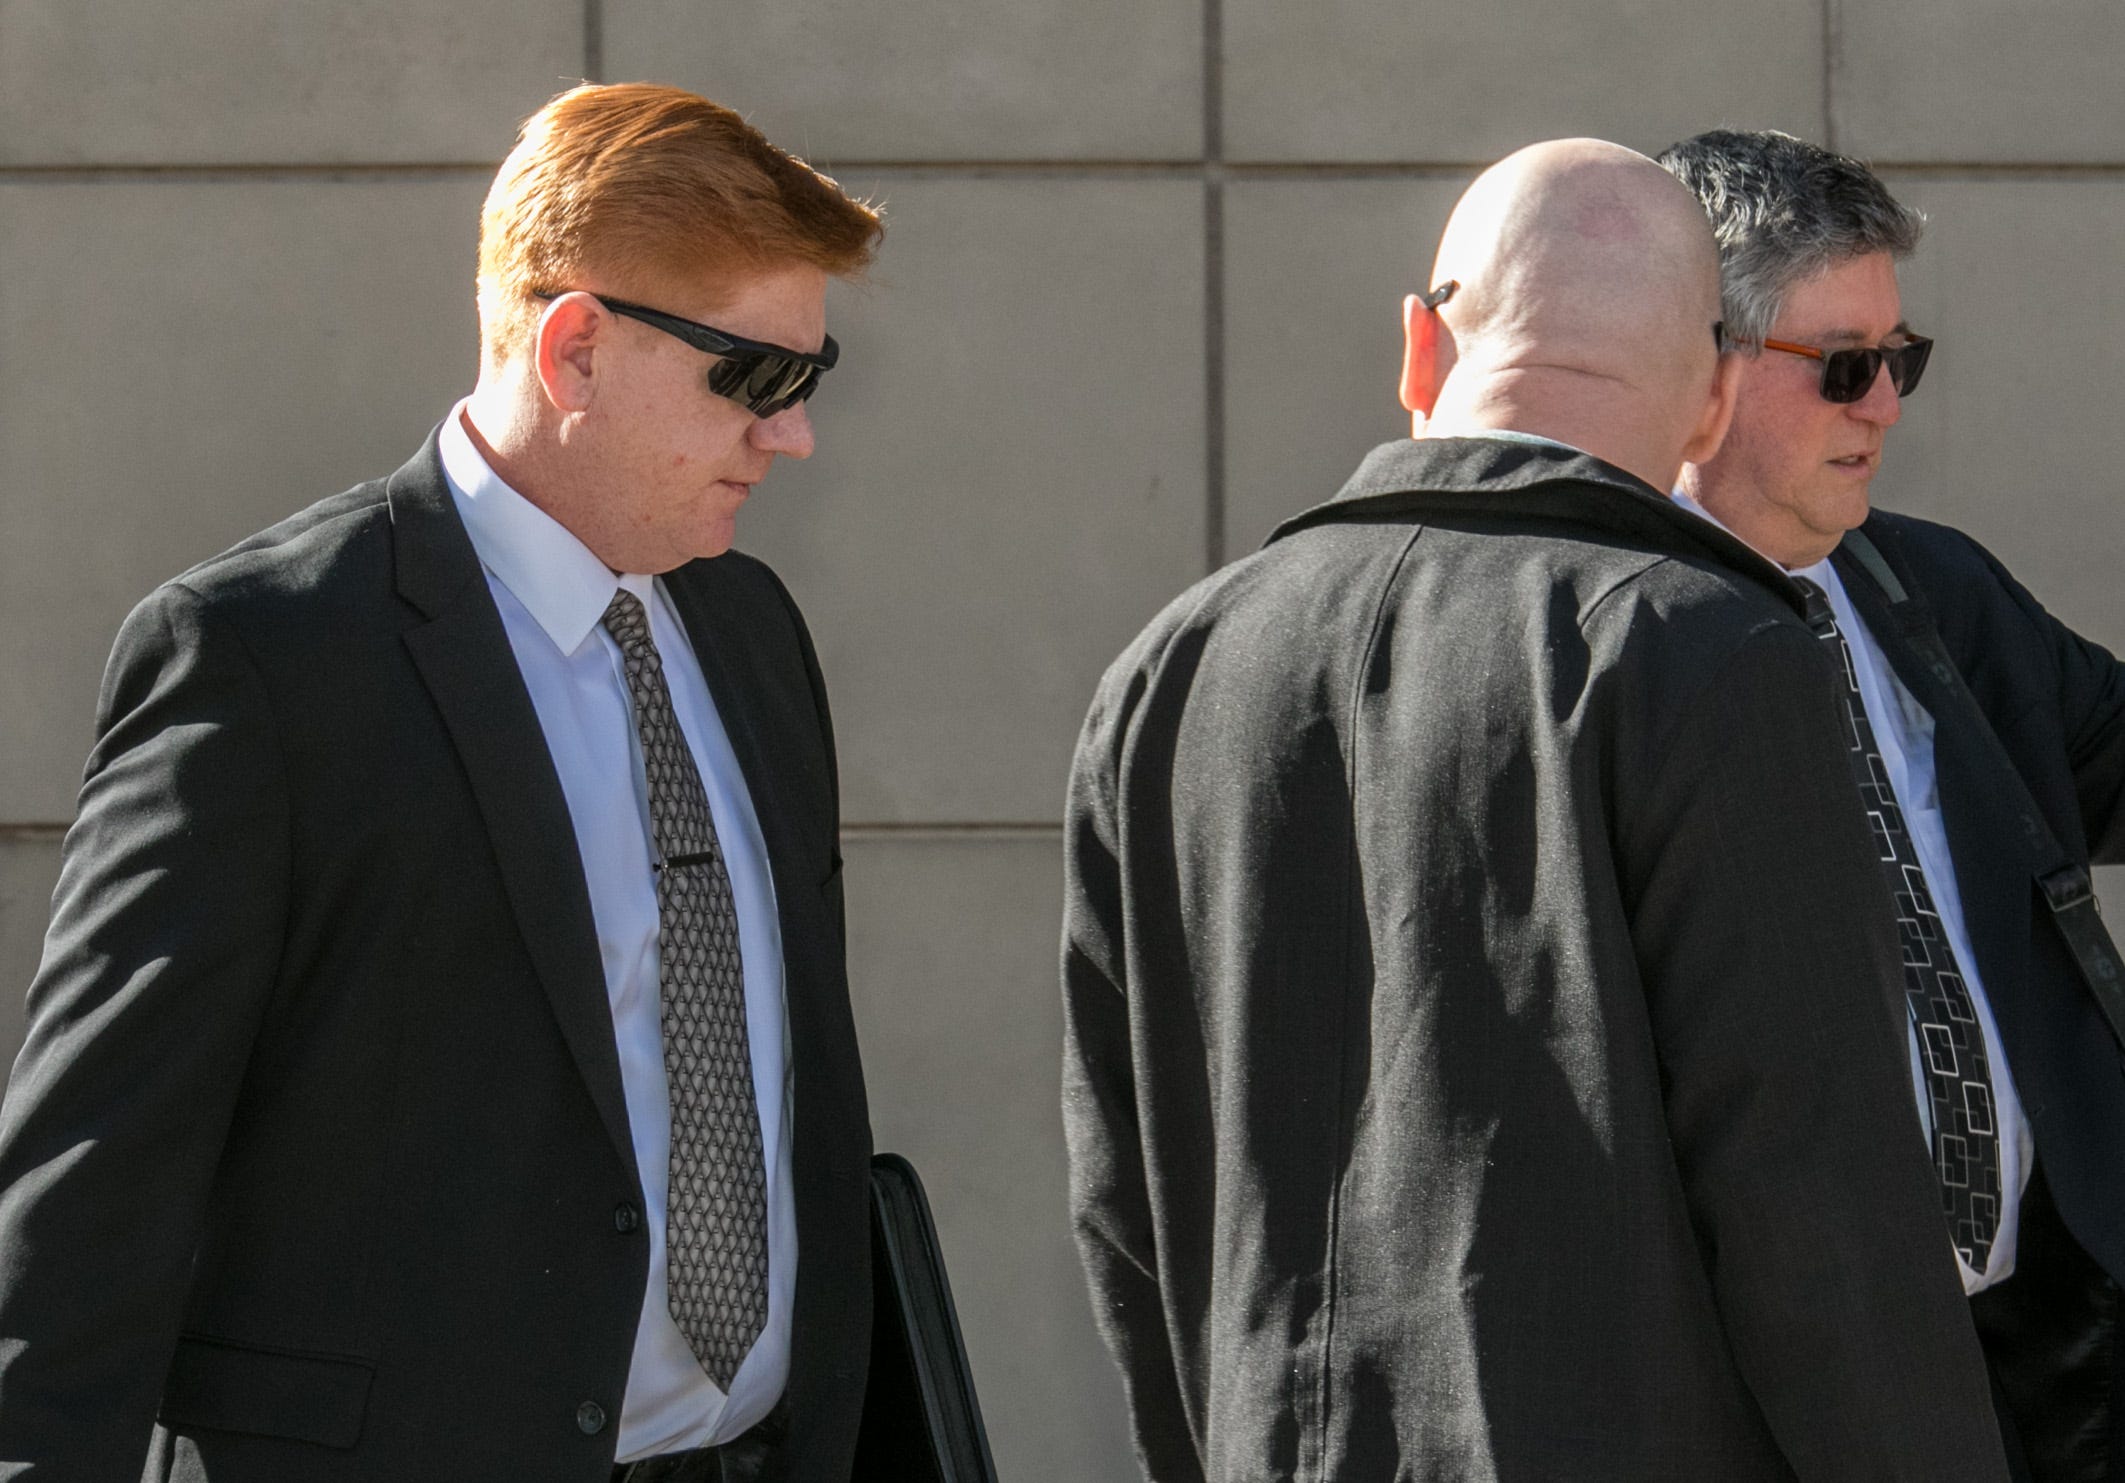 Border Patrol Agent Lonnie Swartz (left) makes his way to the U.S. District Court building in downtown Tucson where opening arguments are scheduled to begin in his murder trial on March 22, 2018.